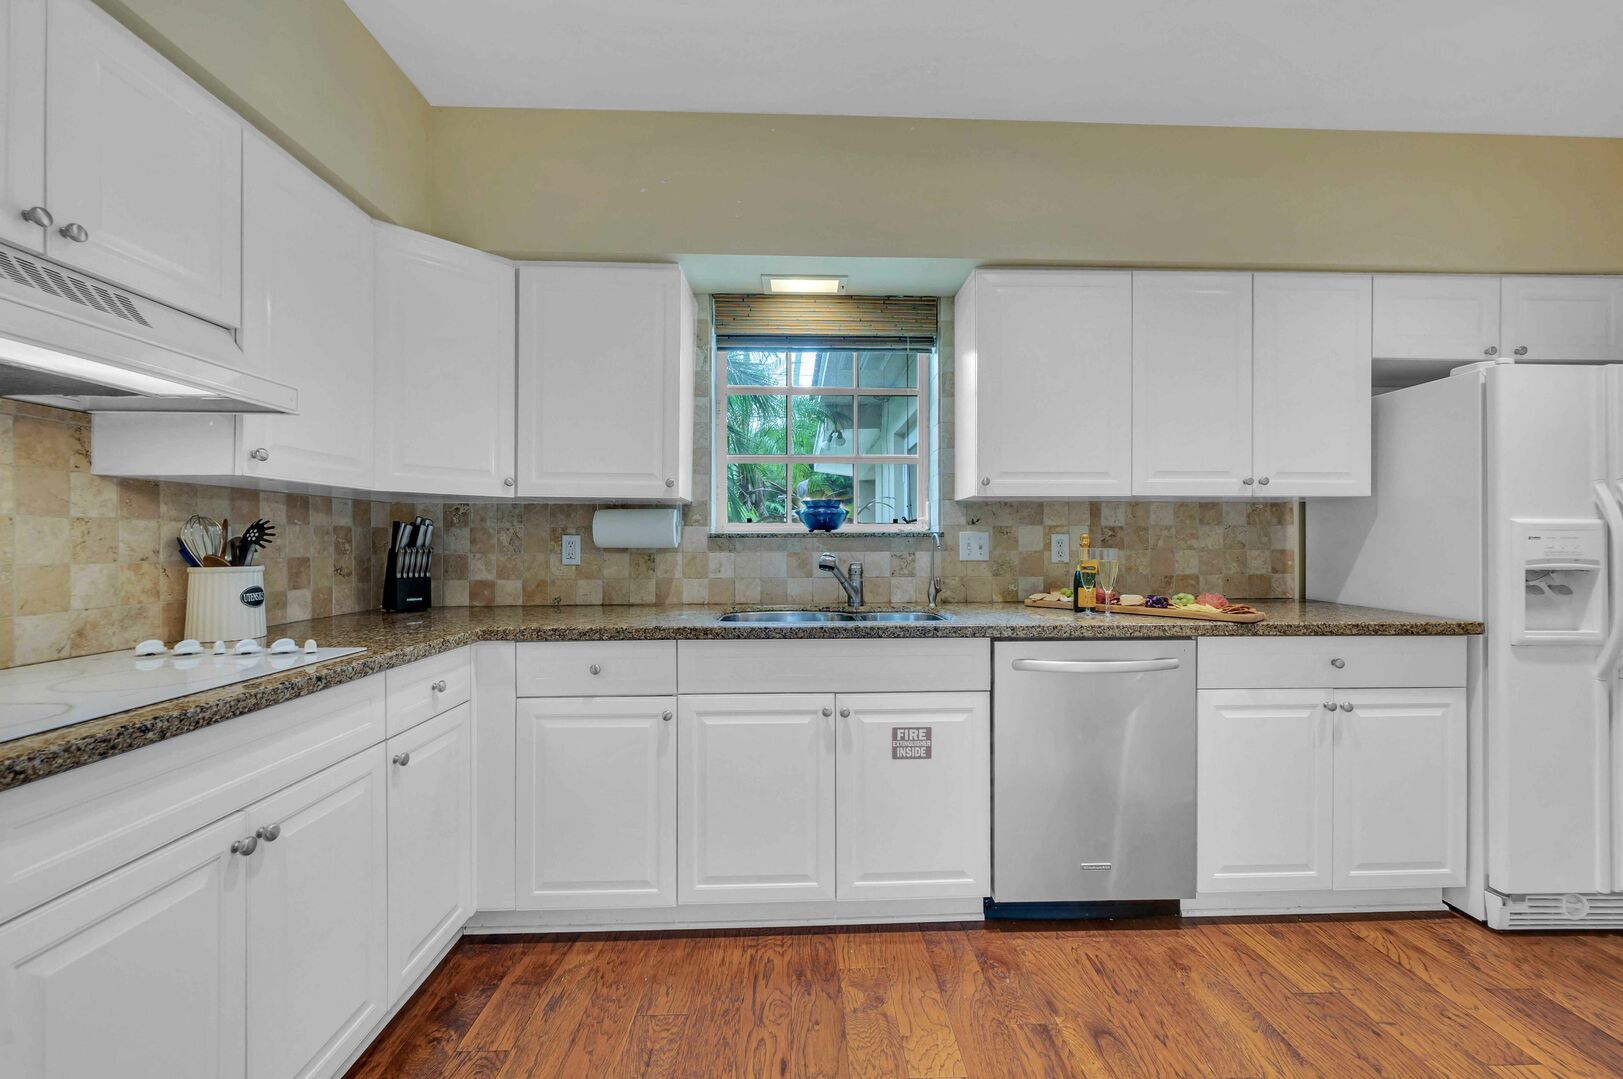 Spacious kitchen with access to breakfast eating area and laundry room.